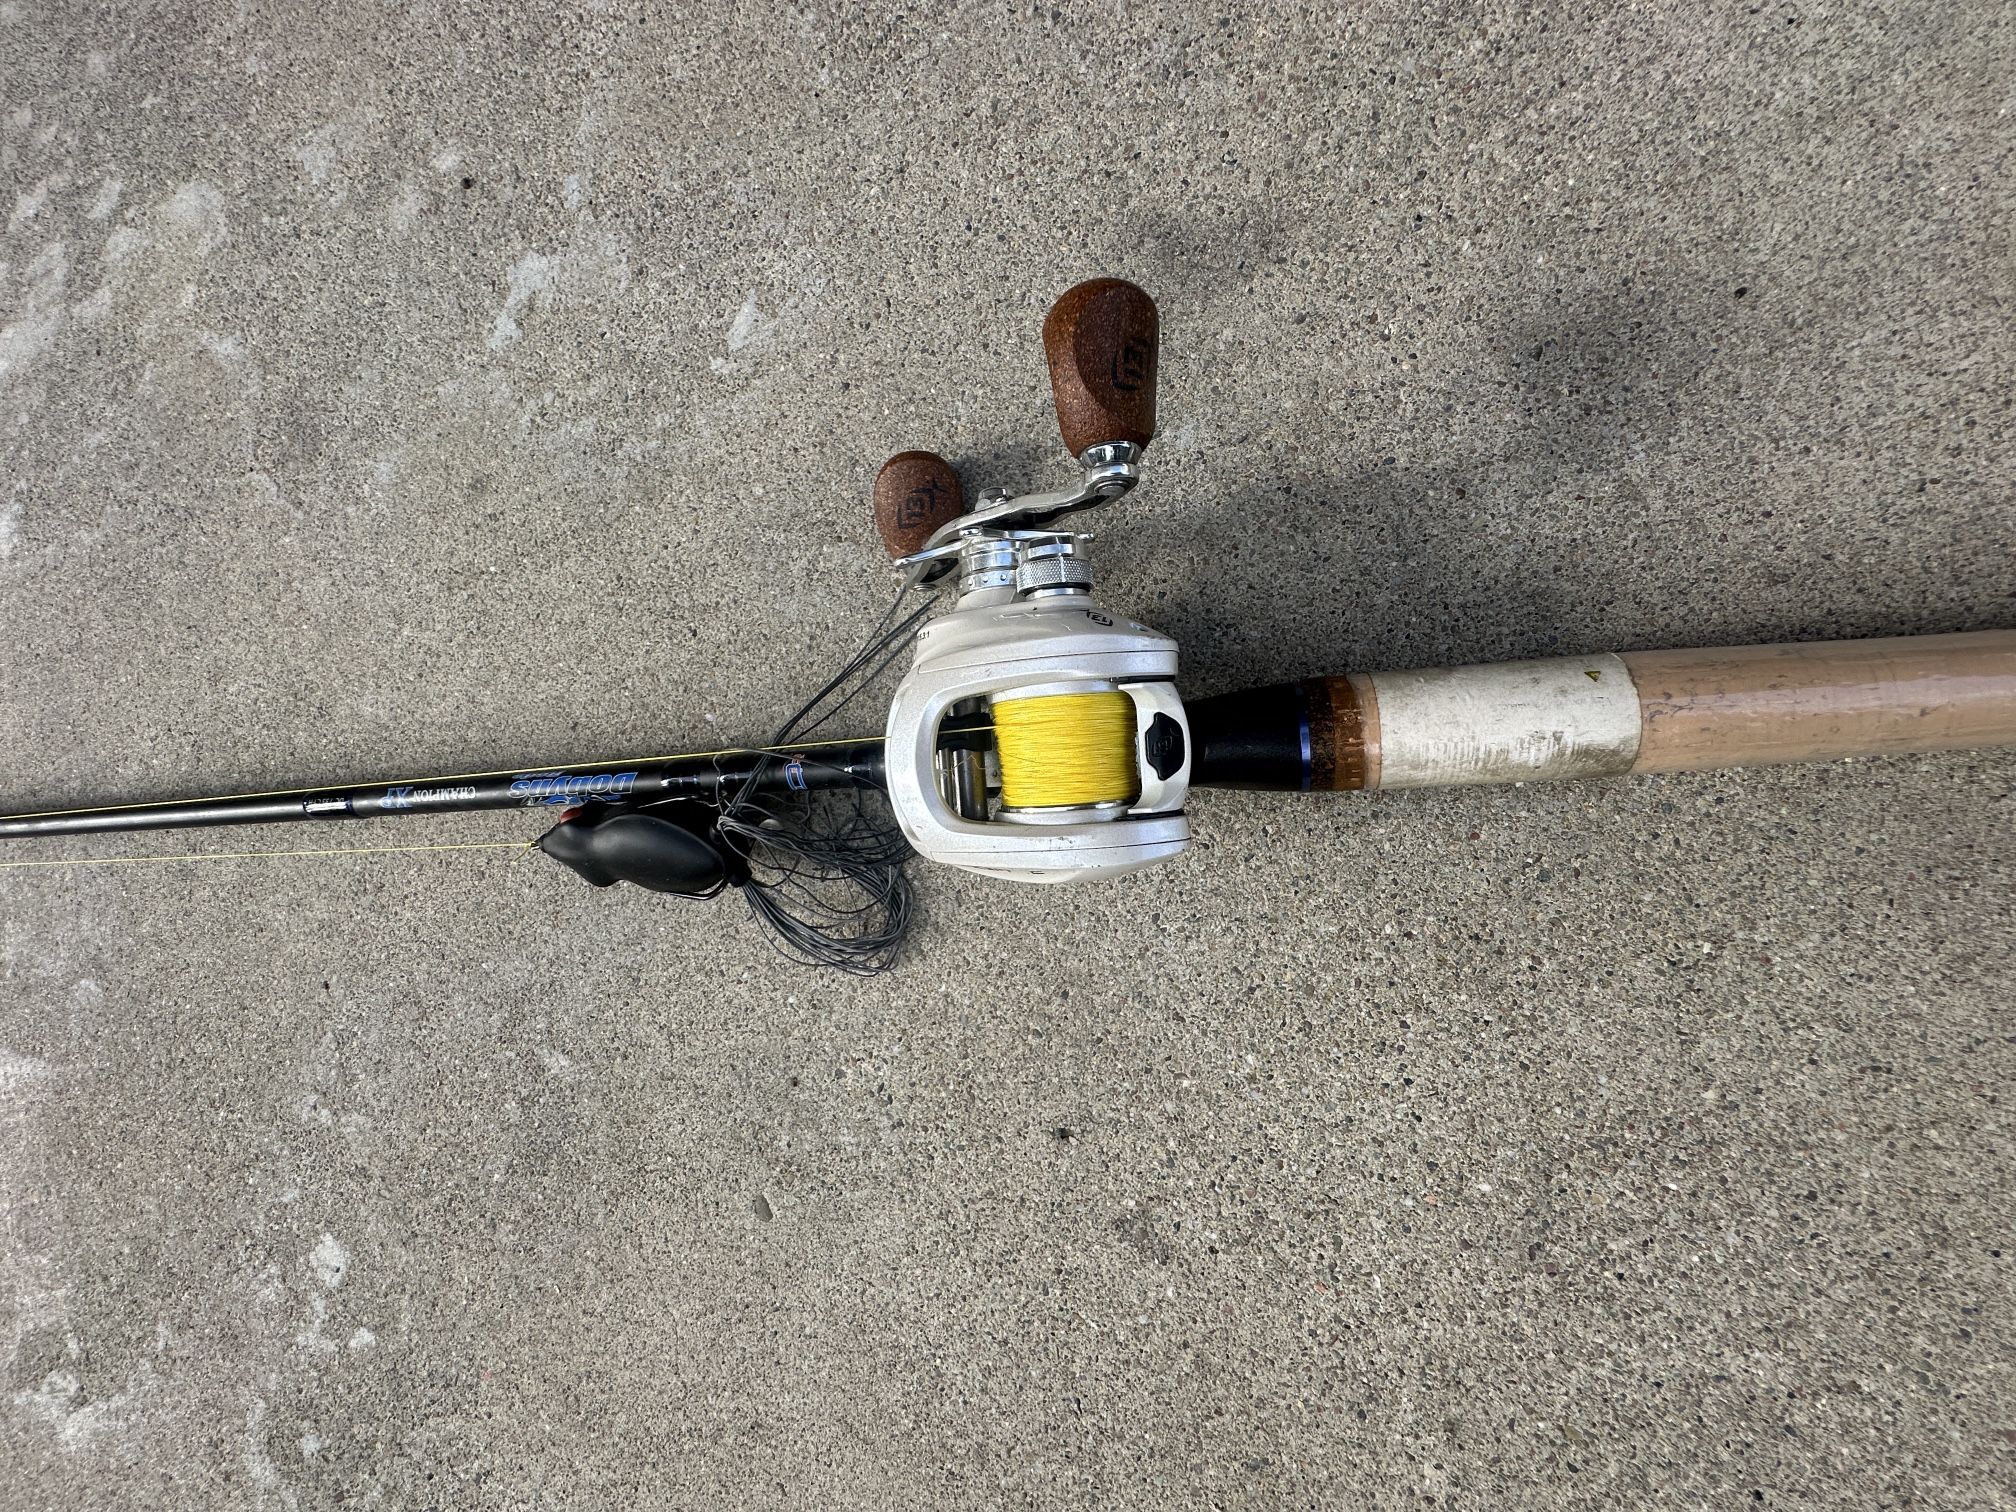 dobyns rod with concept 13 reel